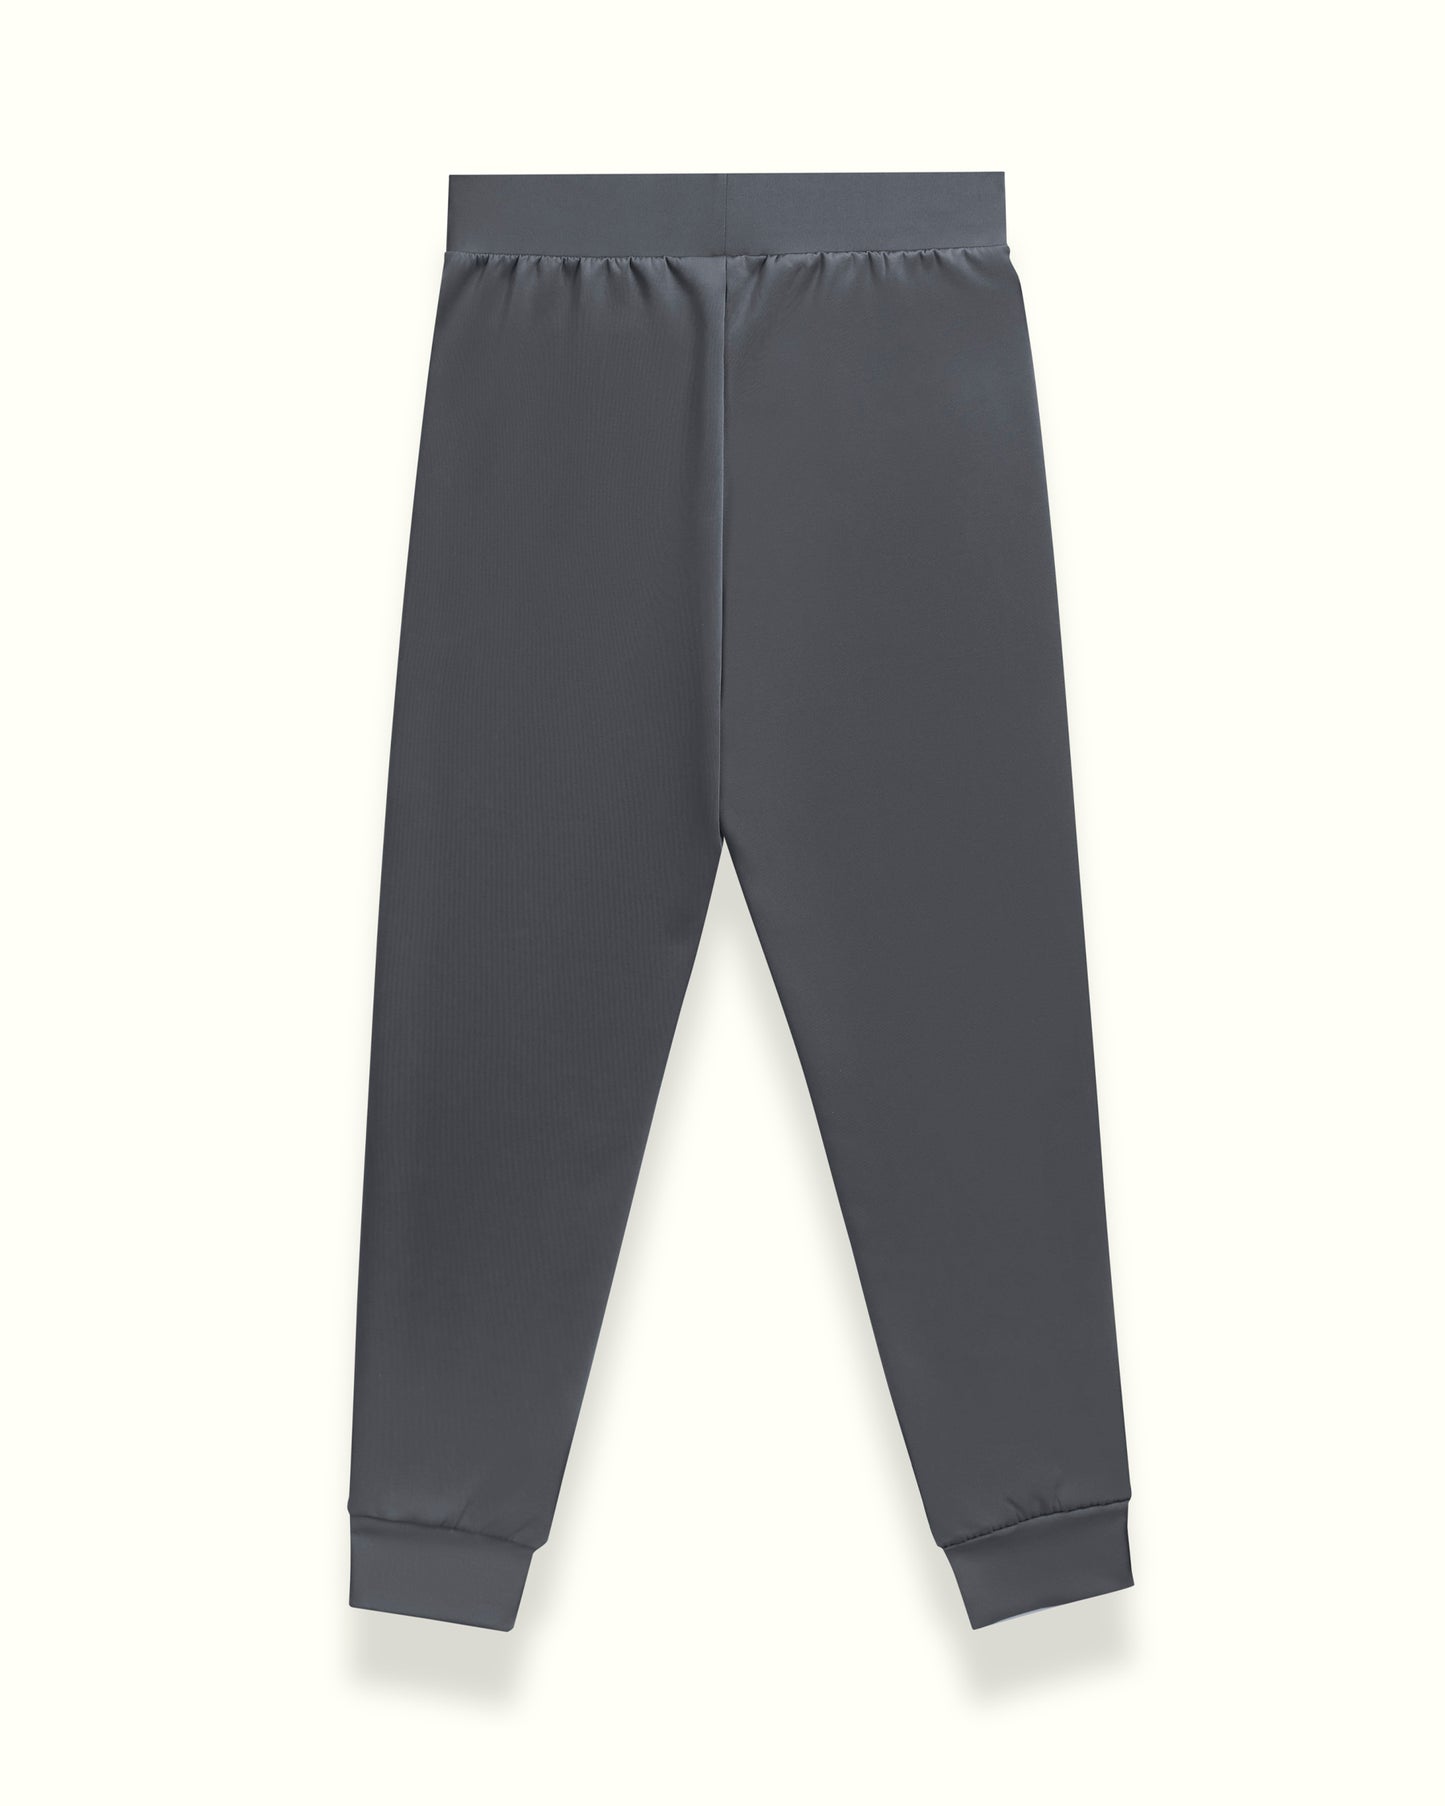 THE BOLD FITTED JOGGER IN DARK GREY